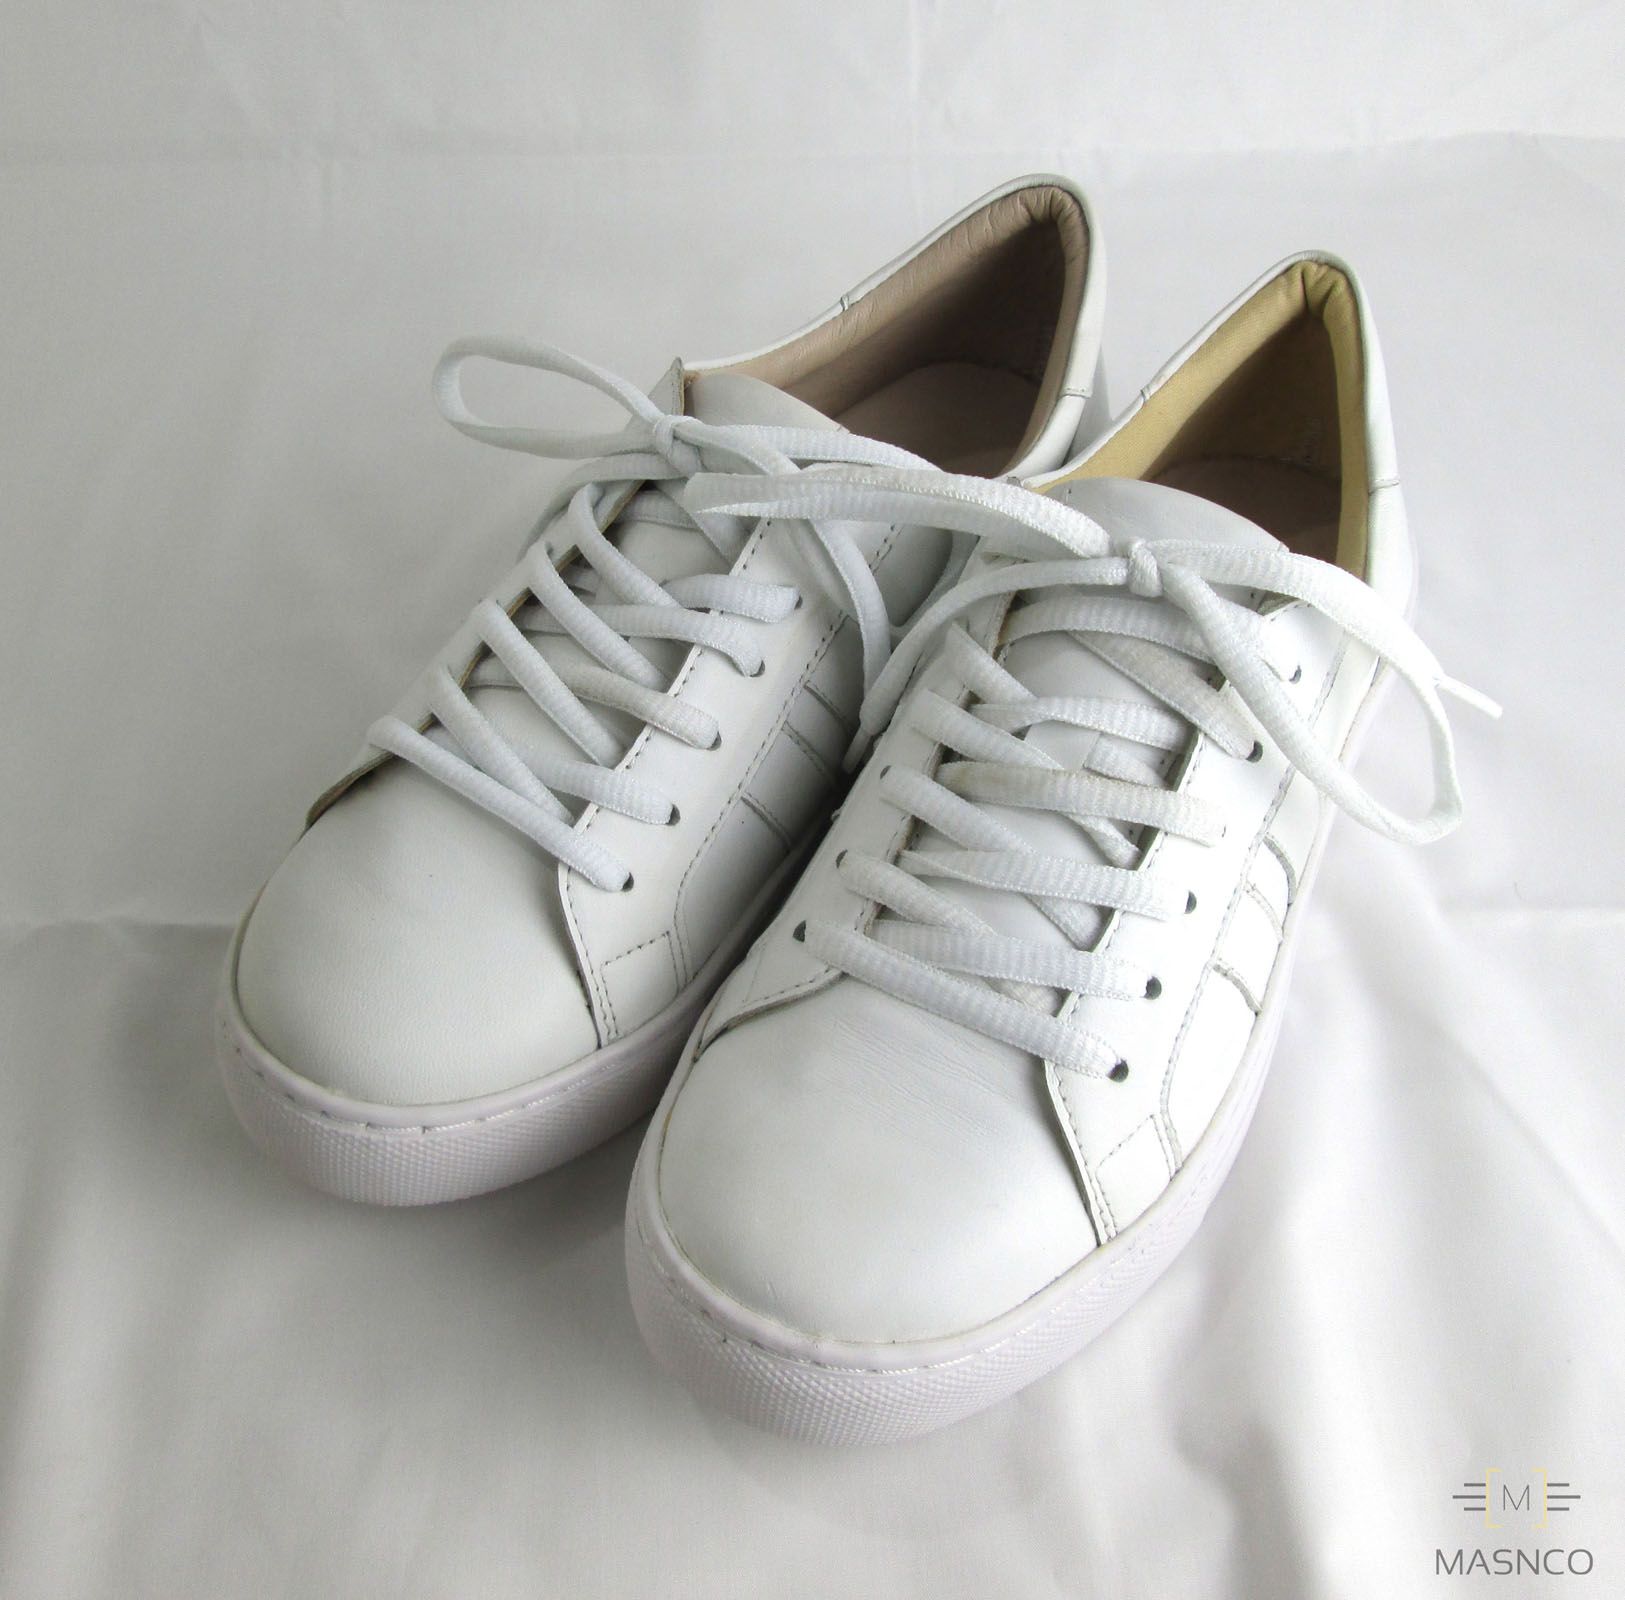 Leather Sneakers for Women’s (White)